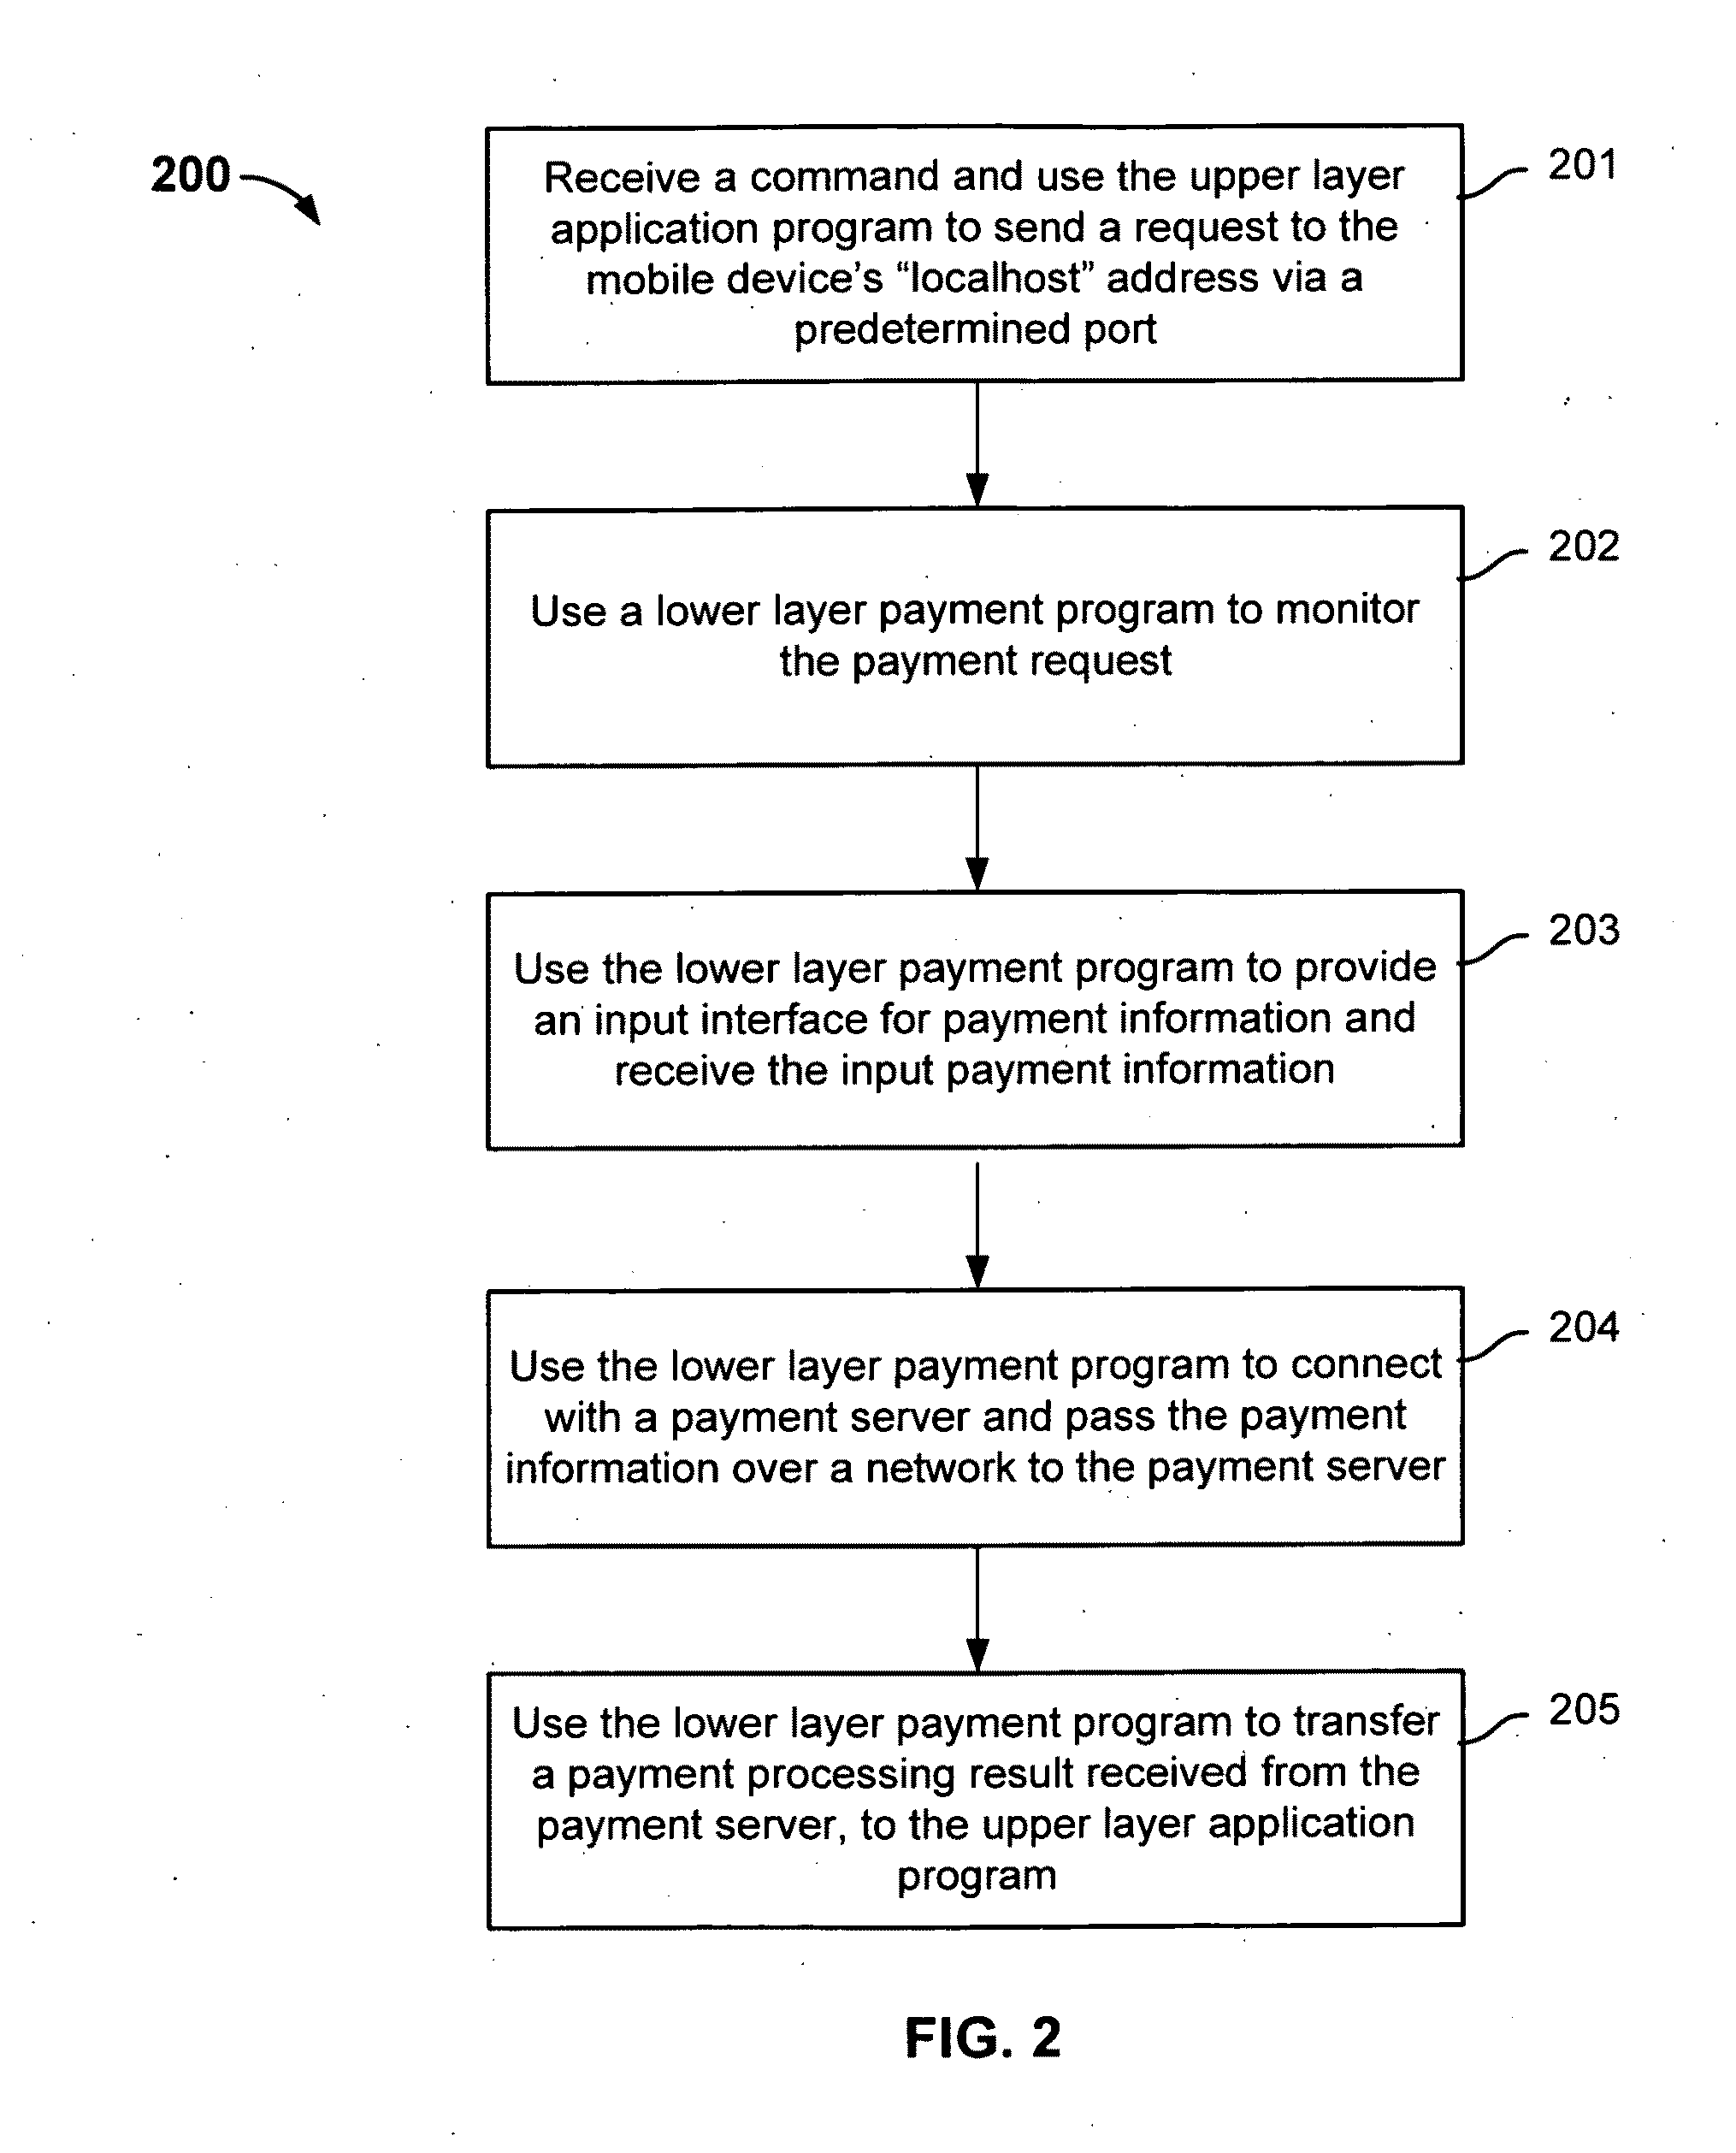 Method and system for payment through mobile devices